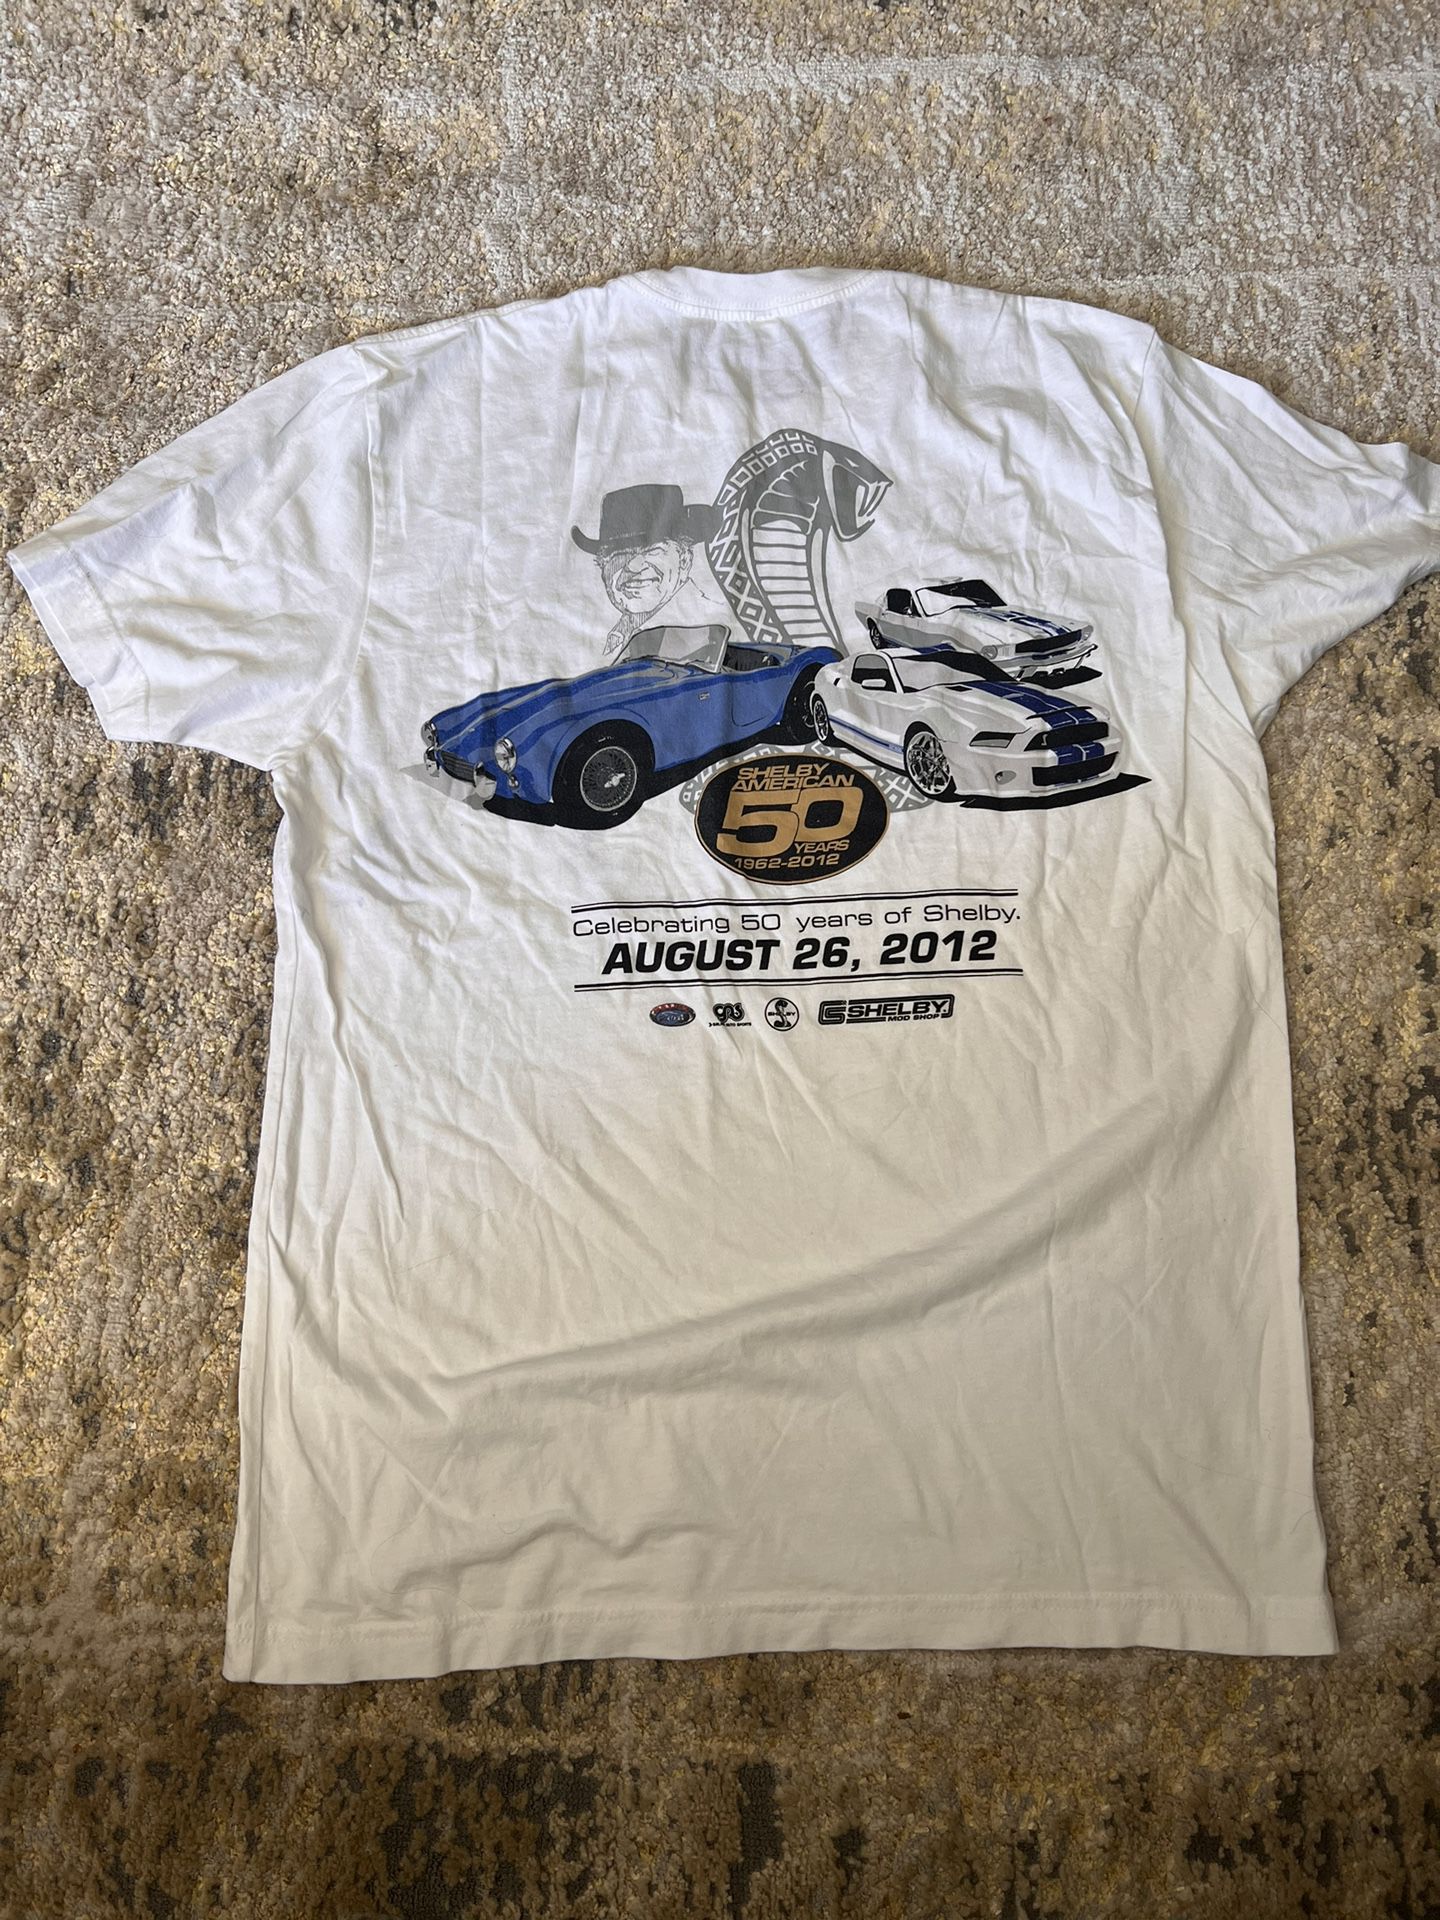 Ford Mustang Shelby 50th Anniversary T Shirt Size Large In Adults From 2012 